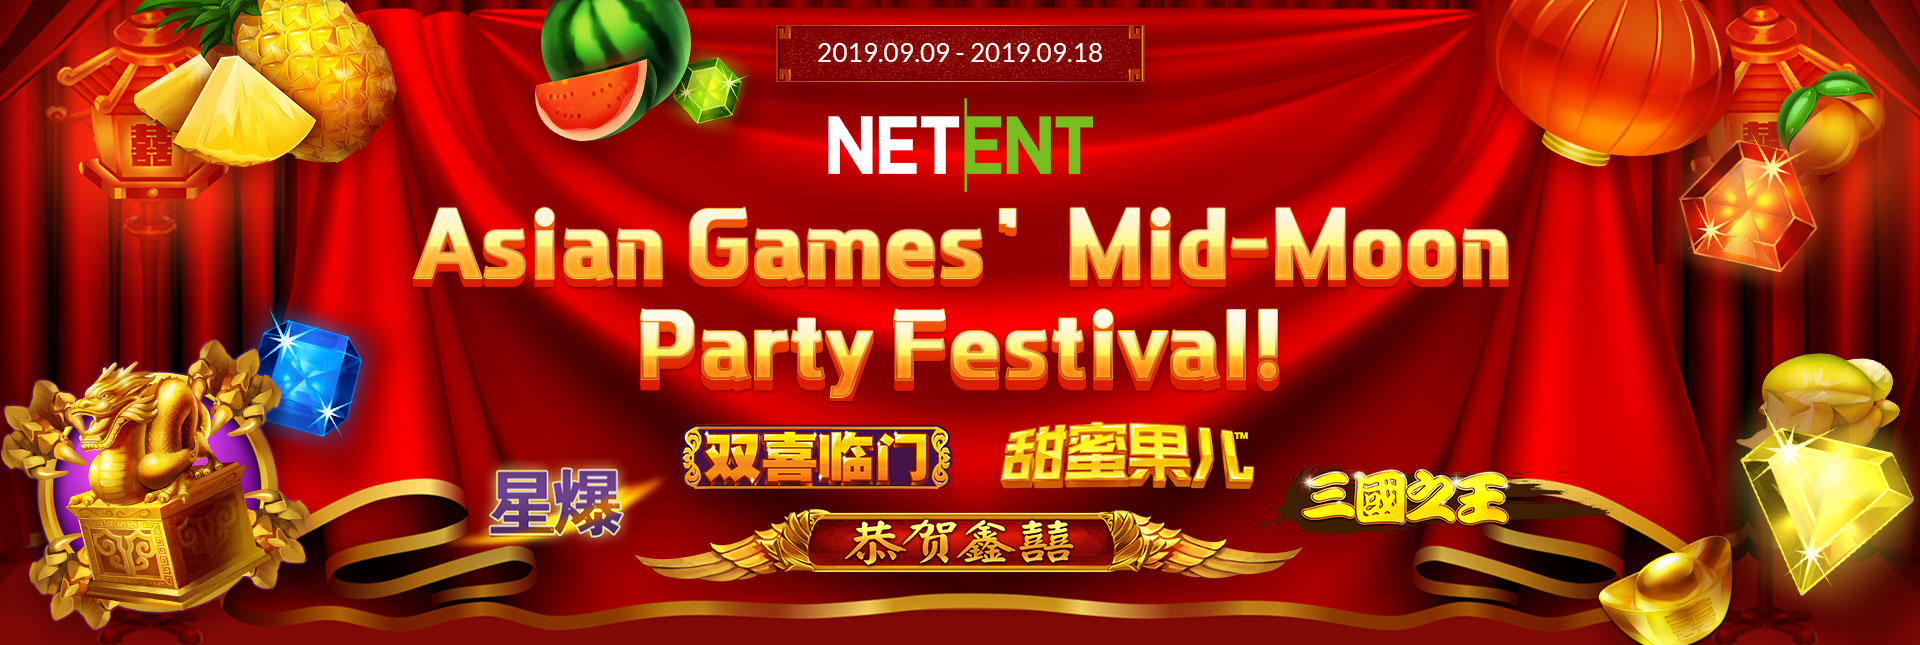 NETENTxFLOWGAMING EXCLUSIVE CAMPAIGN: Asian Games’ Mid-Moon Party
Festival!